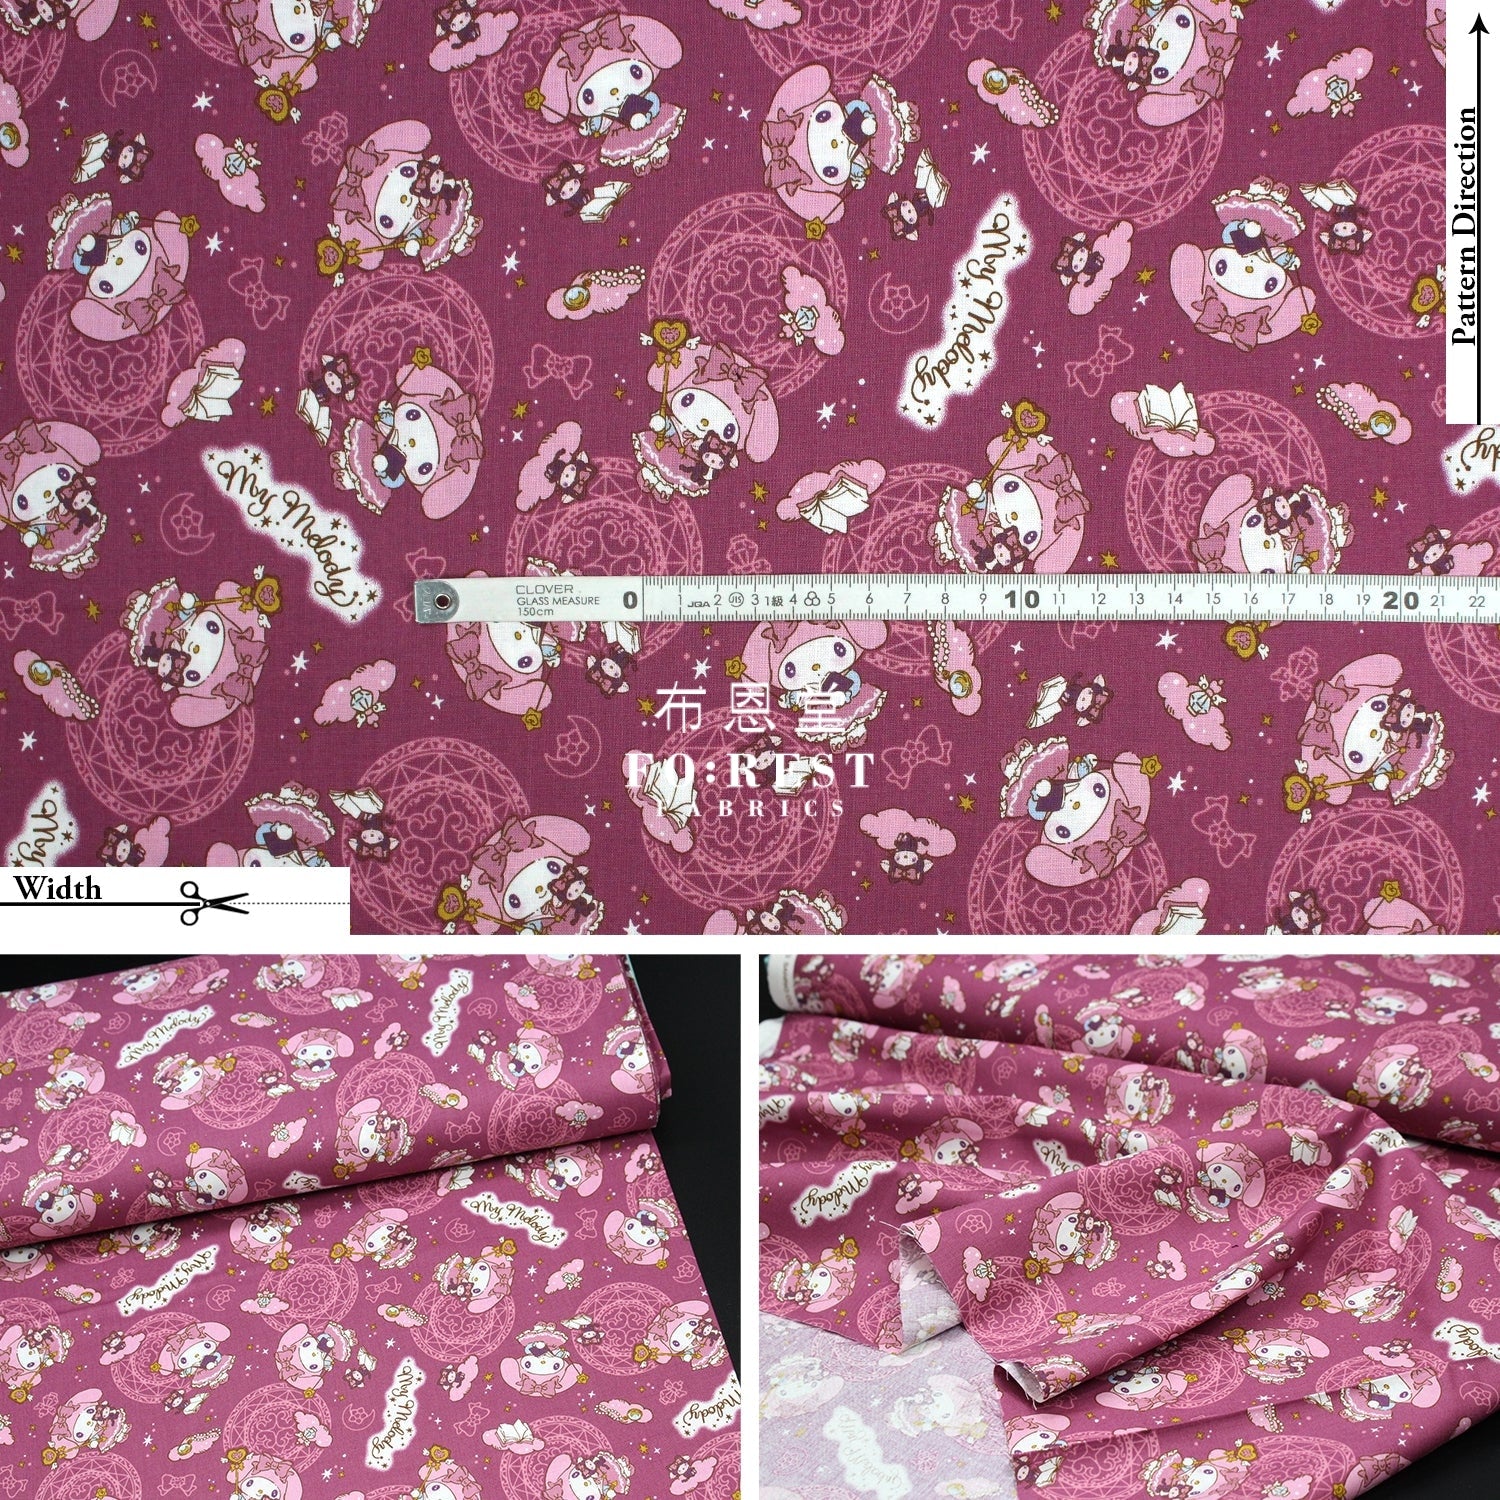 Cotton - Melody Fabric Purplered(Member)